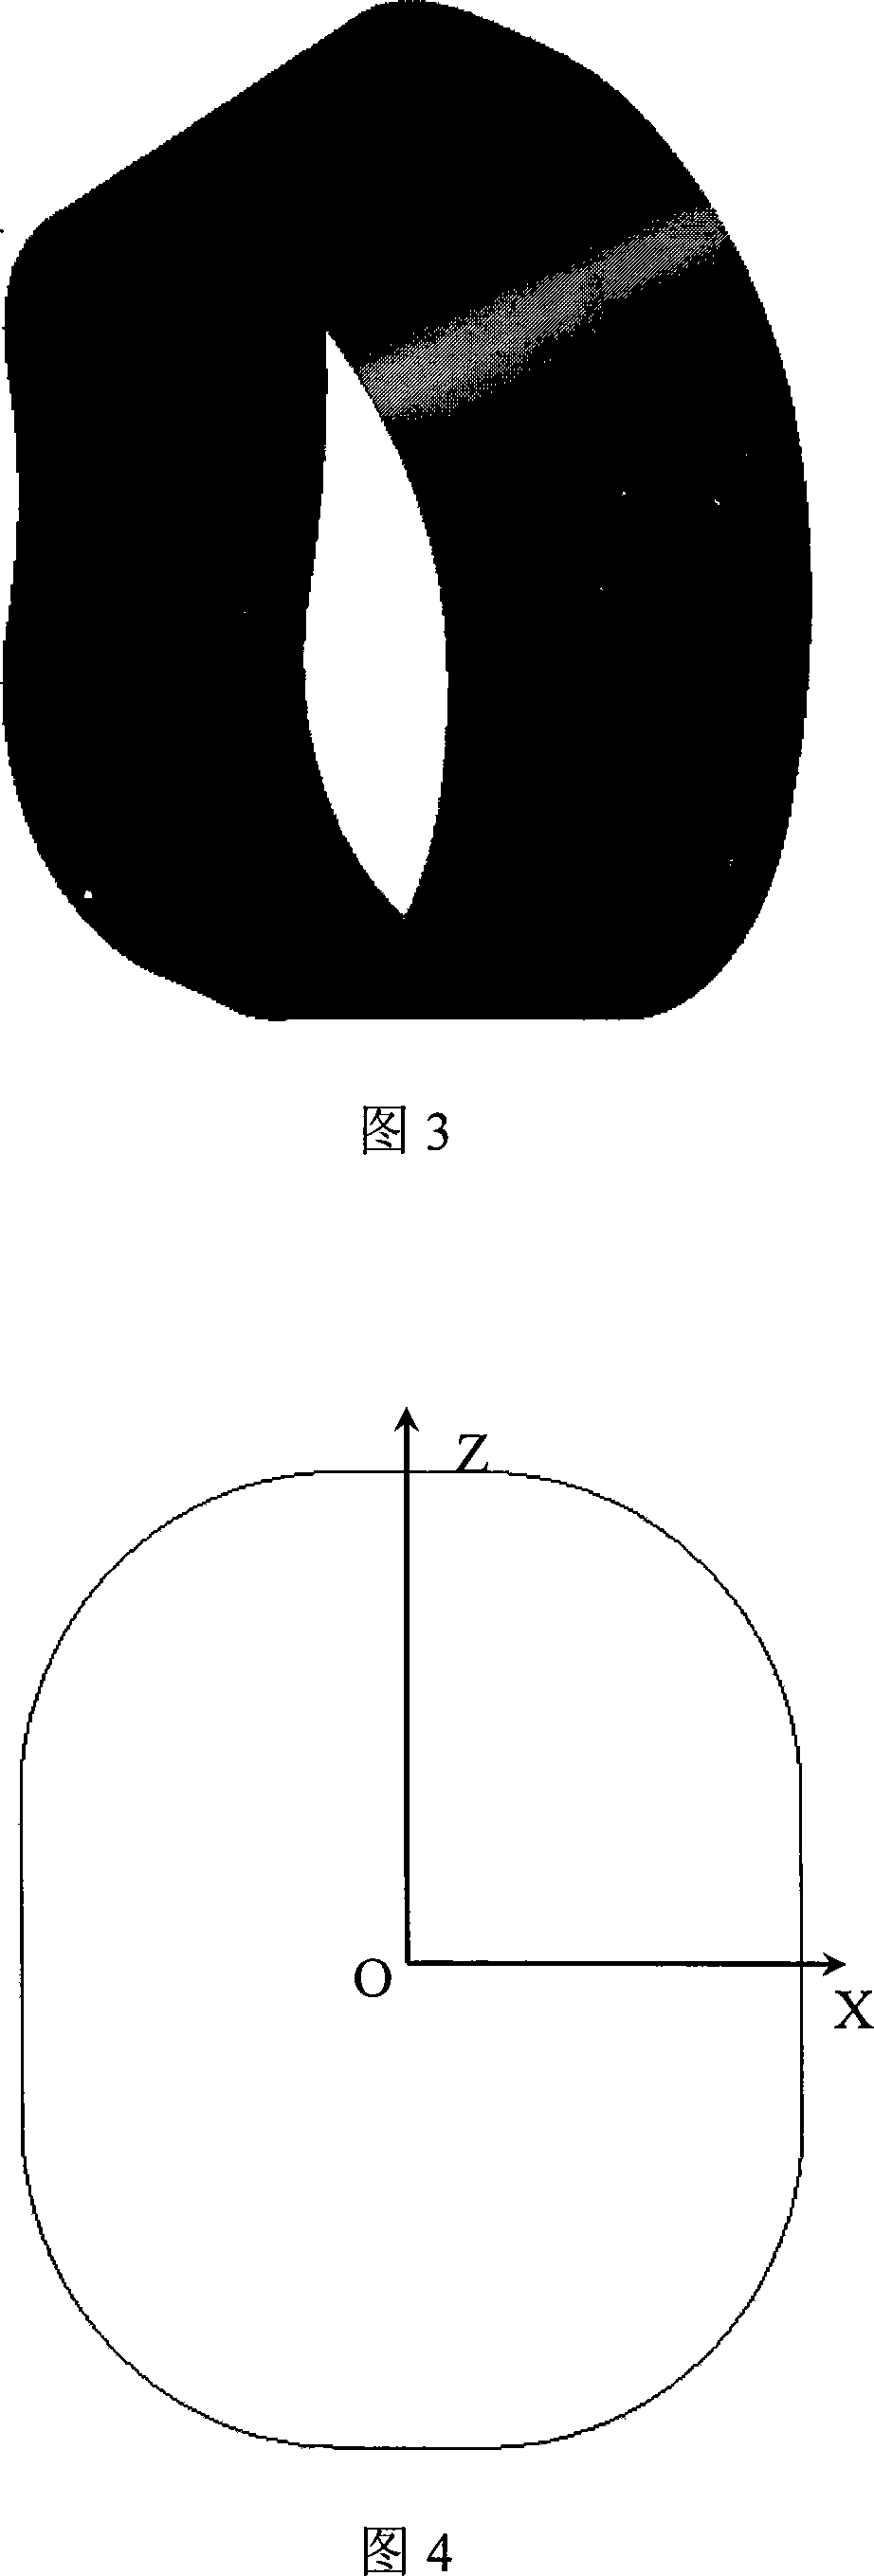 Design method for large visual field optical system lens hood with scan mirror